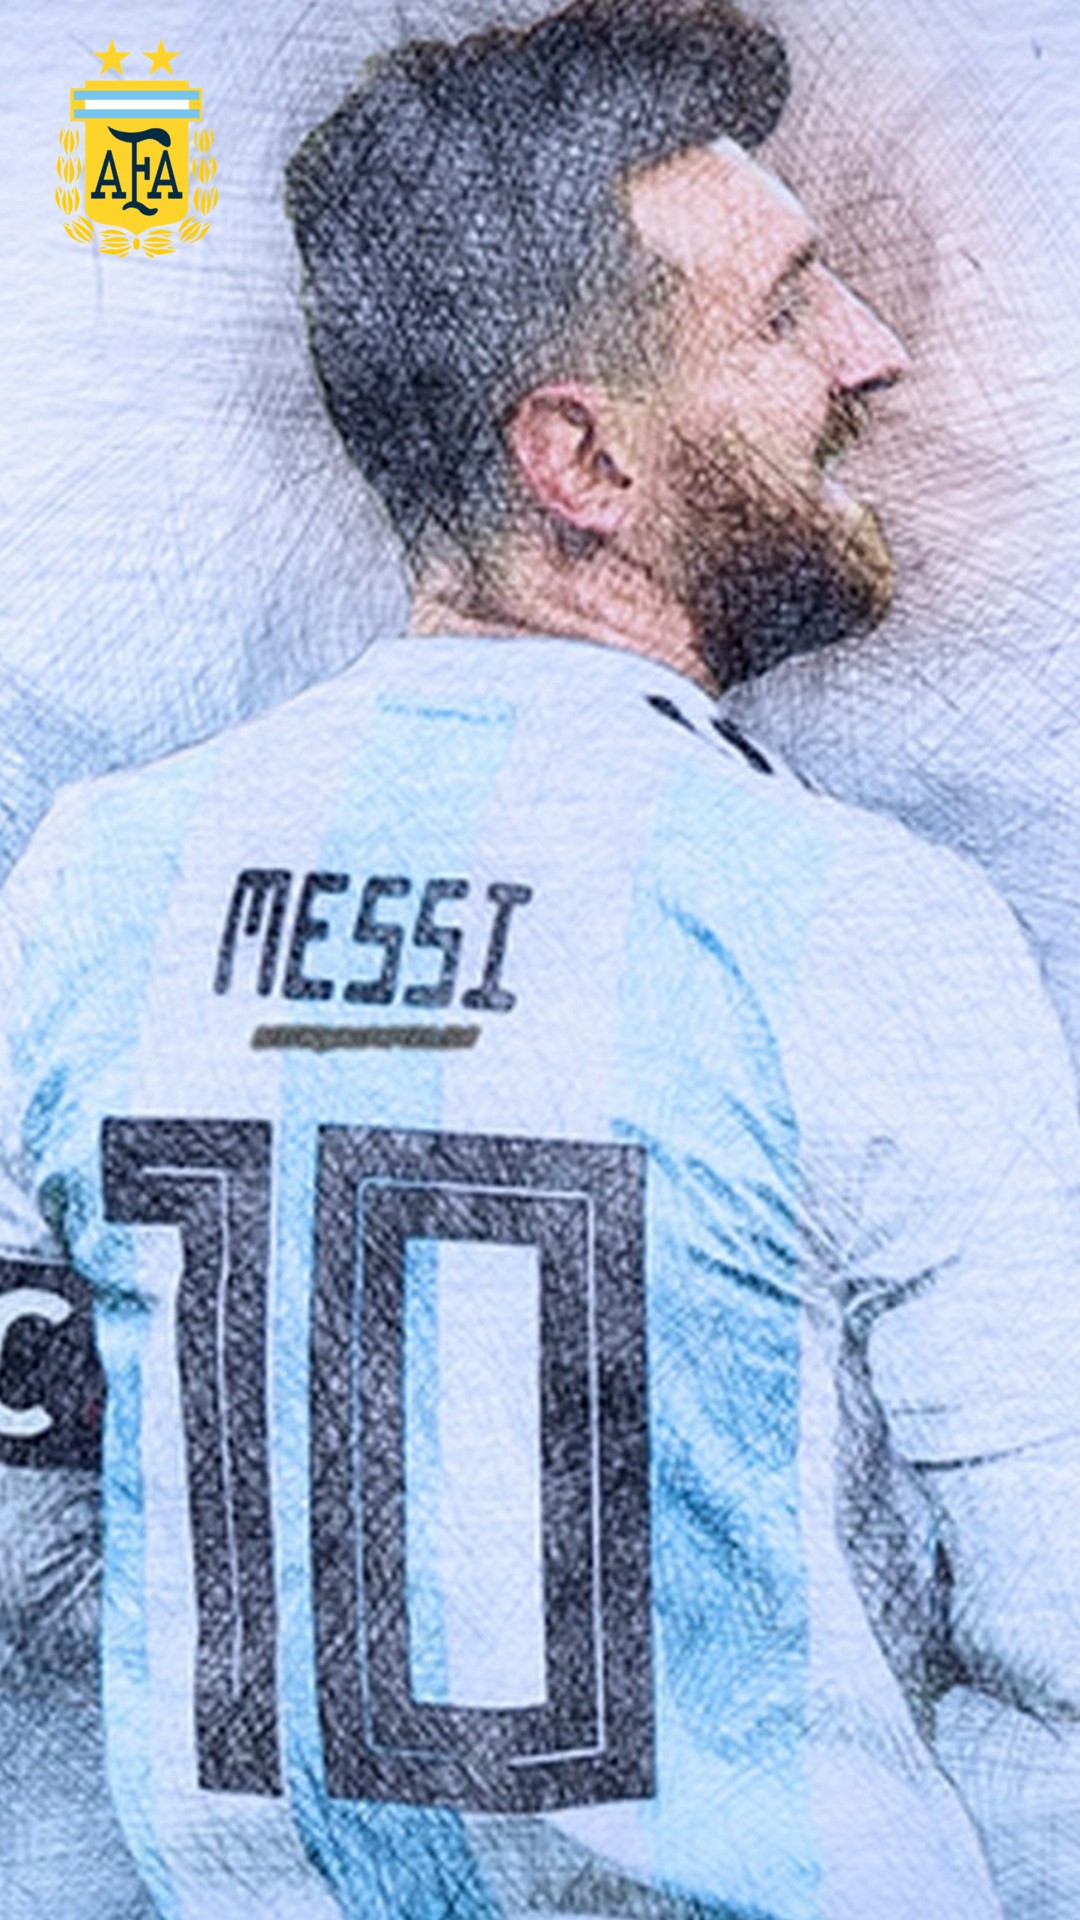 iPhone X Wallpaper Messi Argentina with resolution 1080X1920 pixel. You can make this wallpaper for your iPhone 5, 6, 7, 8, X backgrounds, Mobile Screensaver, or iPad Lock Screen